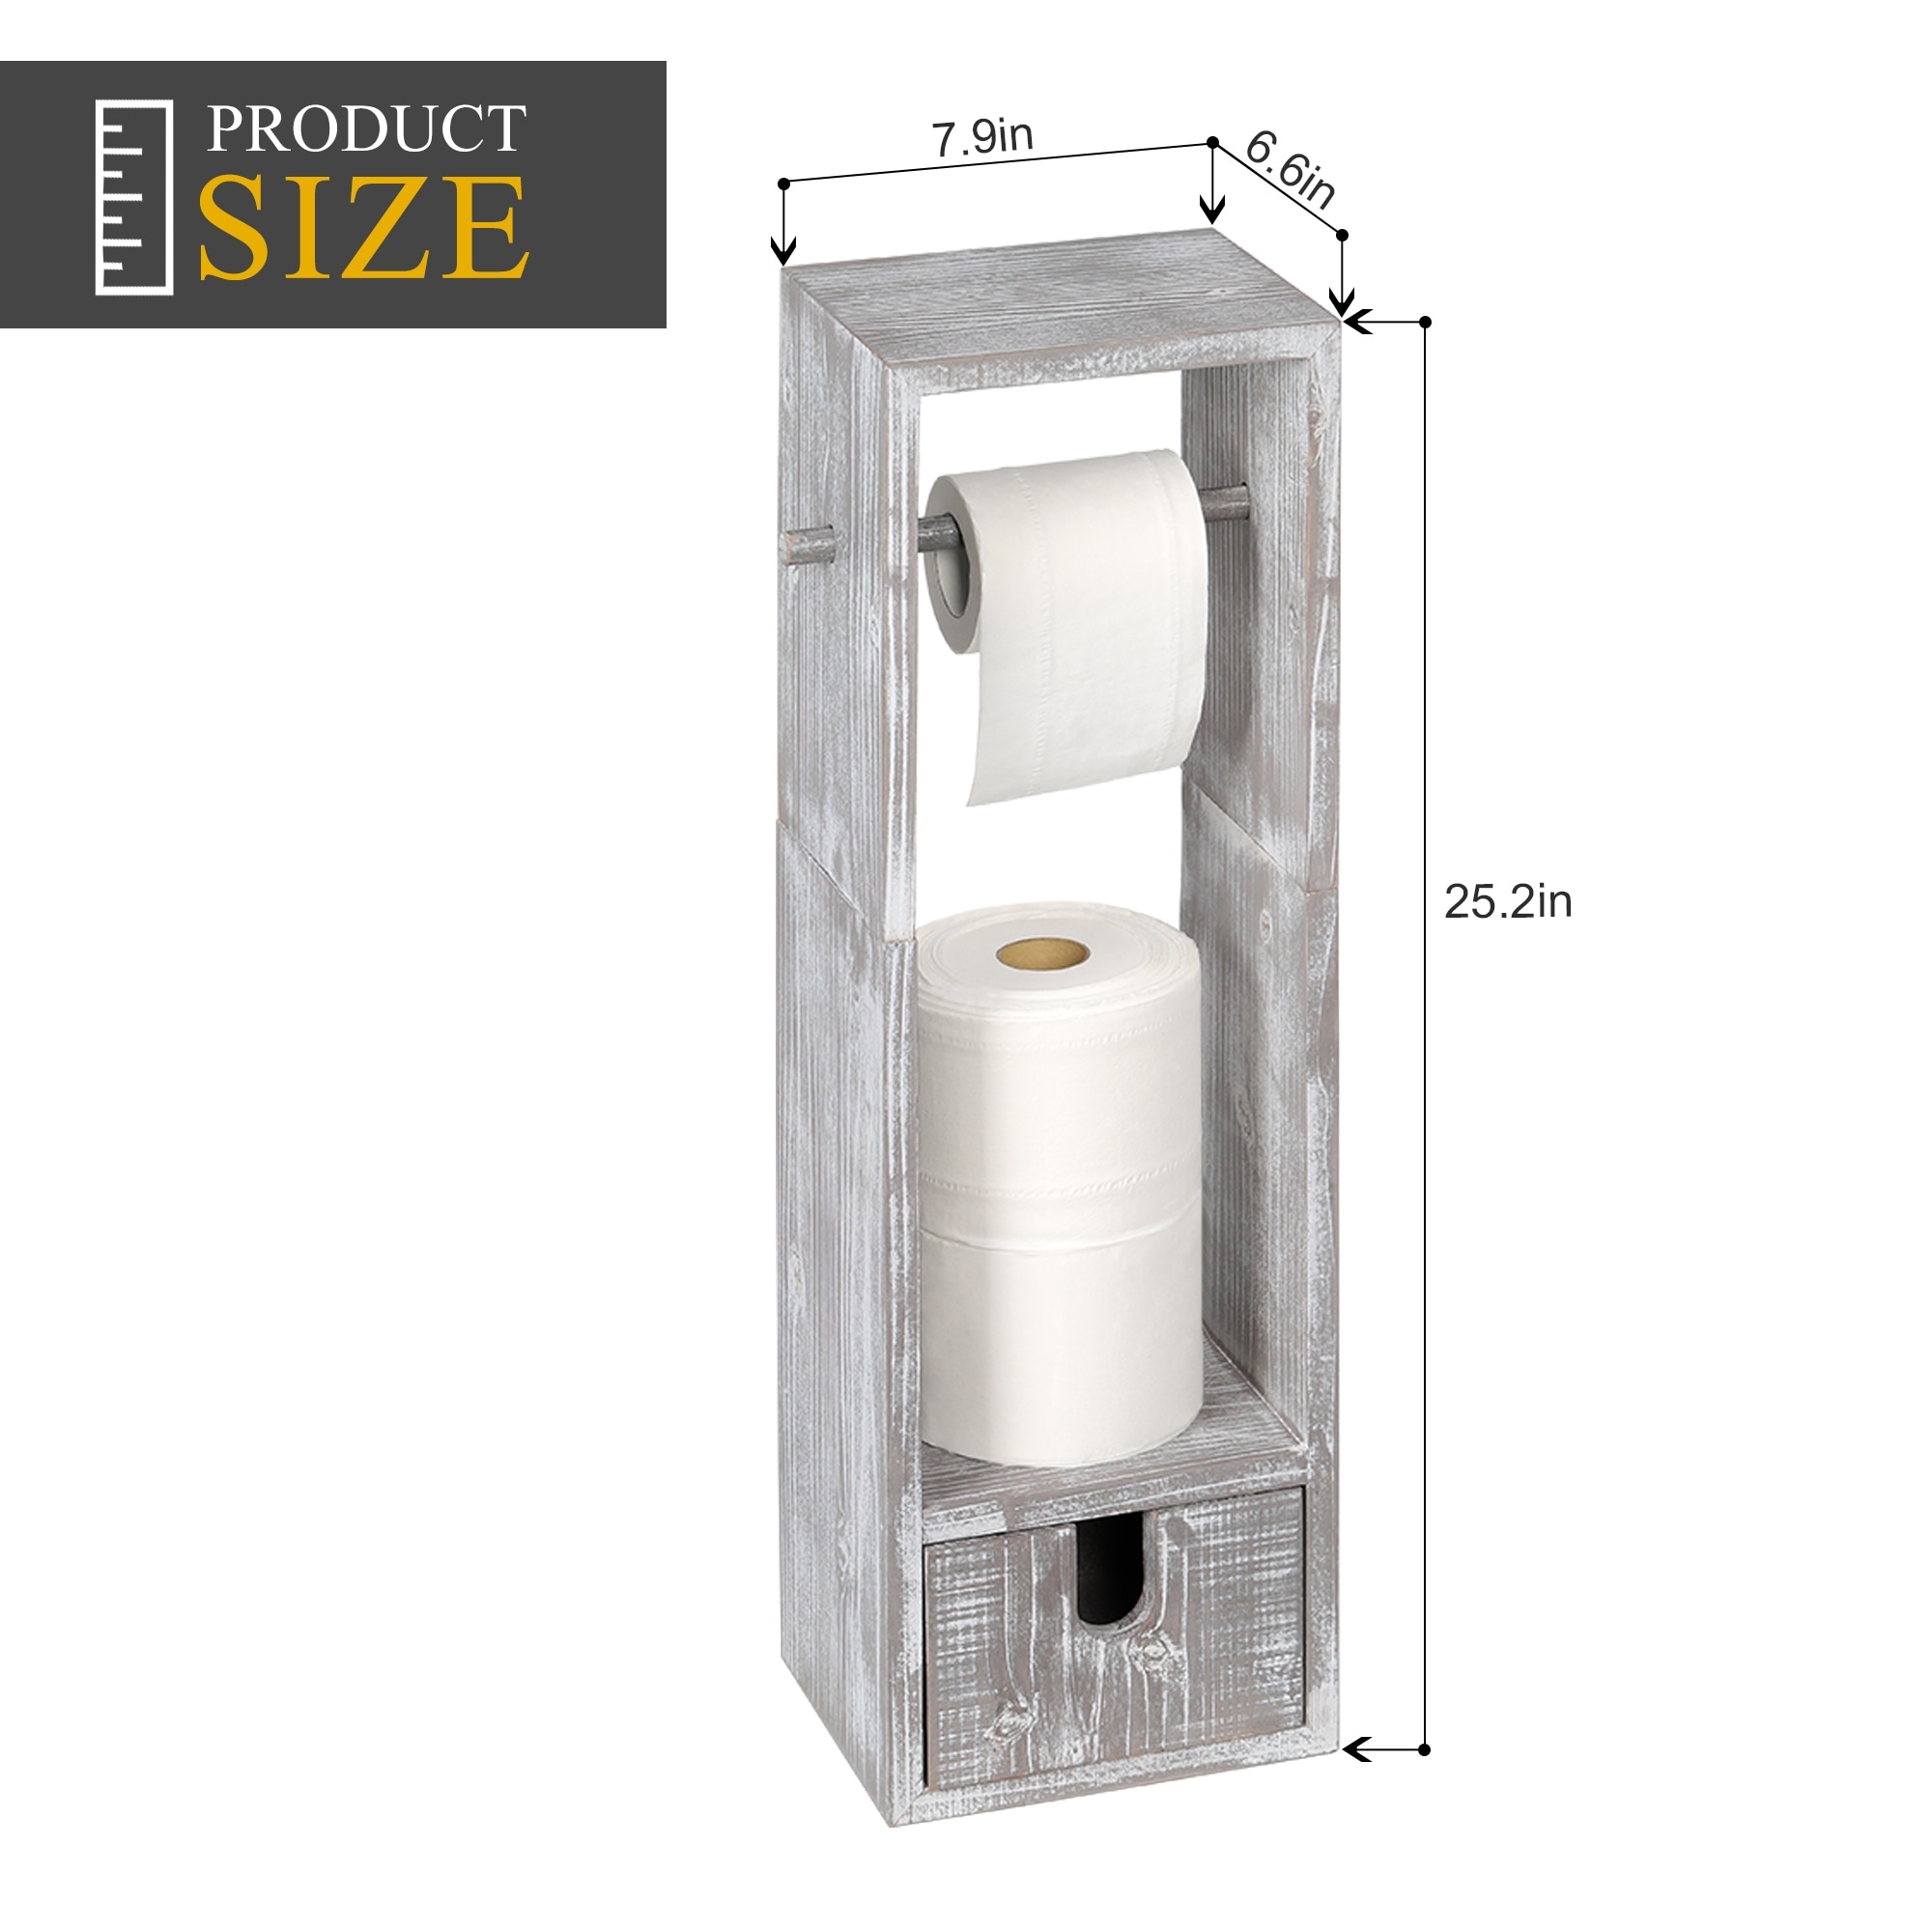 Freestanding Toilet Paper Holder Stand - On Sale - Bed Bath & Beyond -  37598051